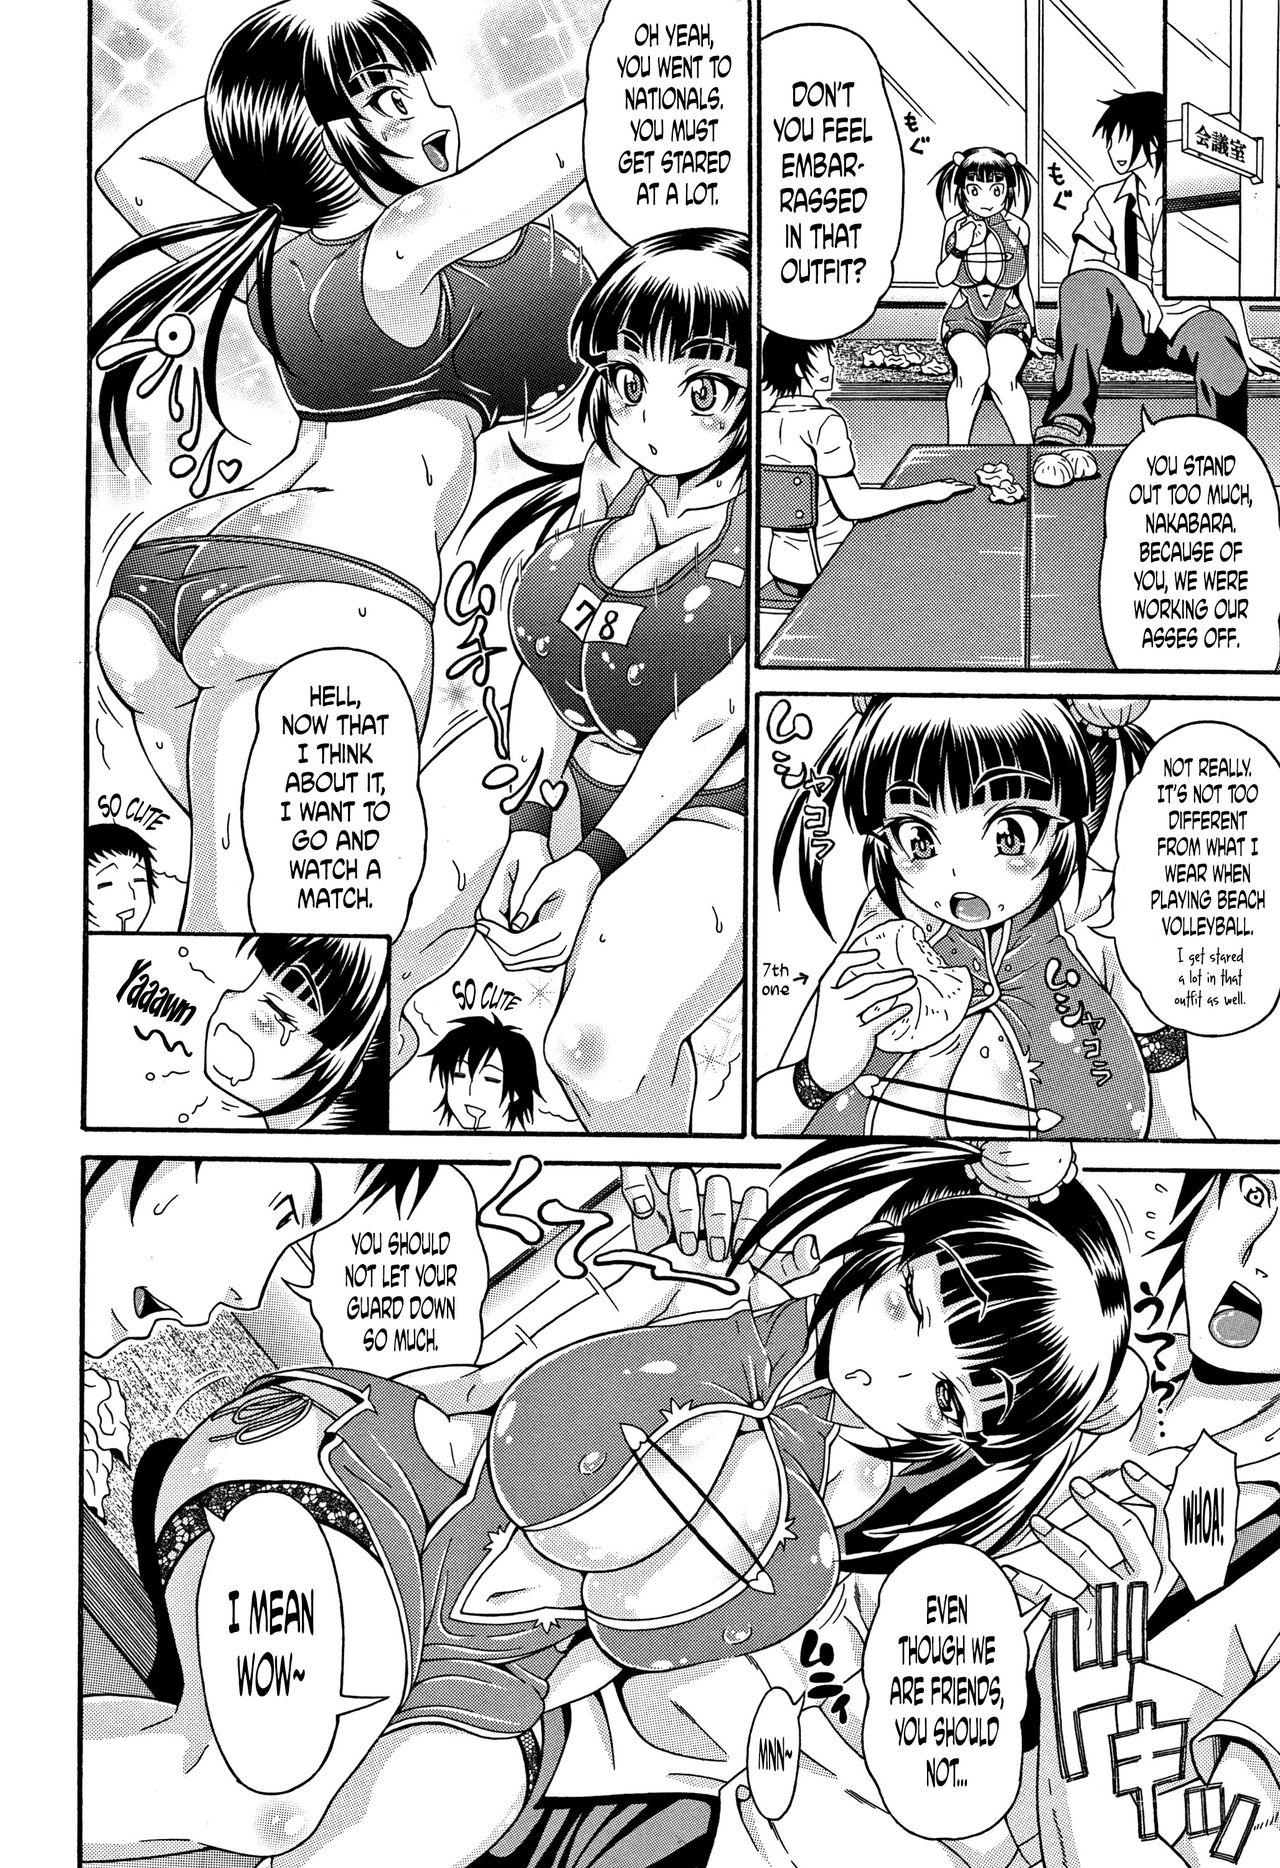 [Andou Hiroyuki] Mamire Chichi - Sticky Tits Feel Hot All Over. Ch.1-8 [English] [doujin-moe.us] 92